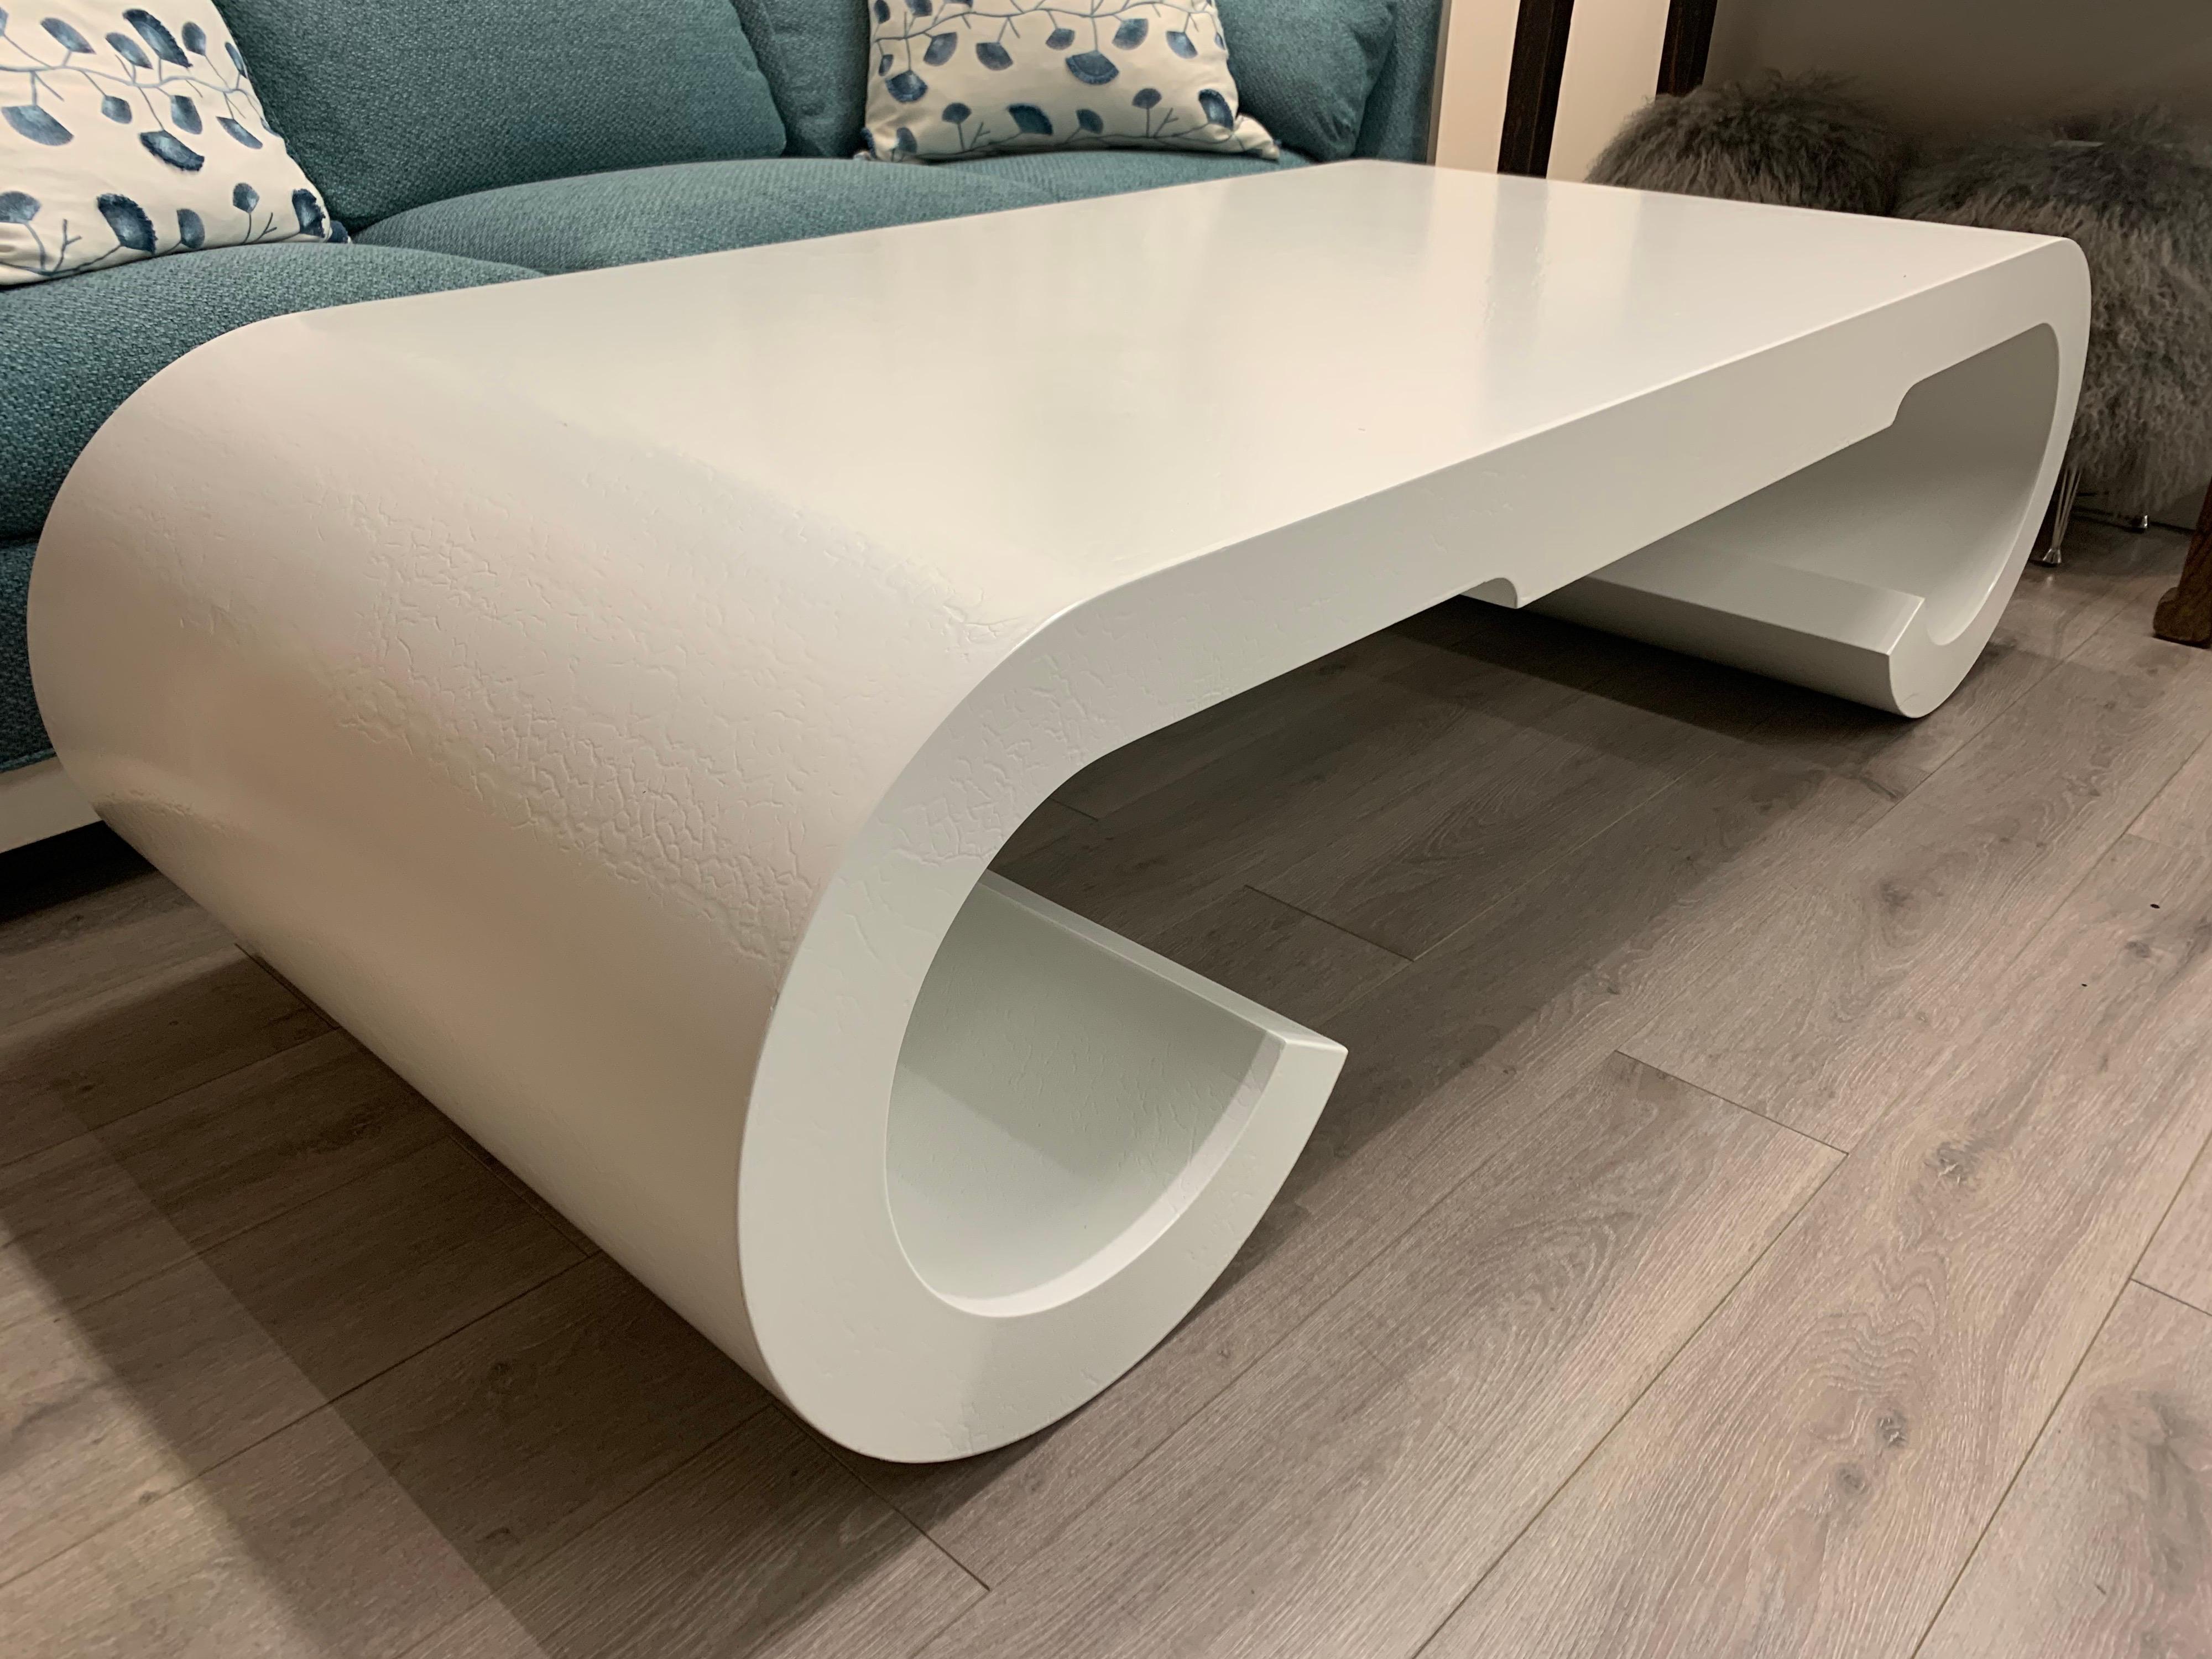 Stunning, large newly lacquered white sculptural cocktail table. Great scale
and better lines. Now, more than ever, home is where the heart is.